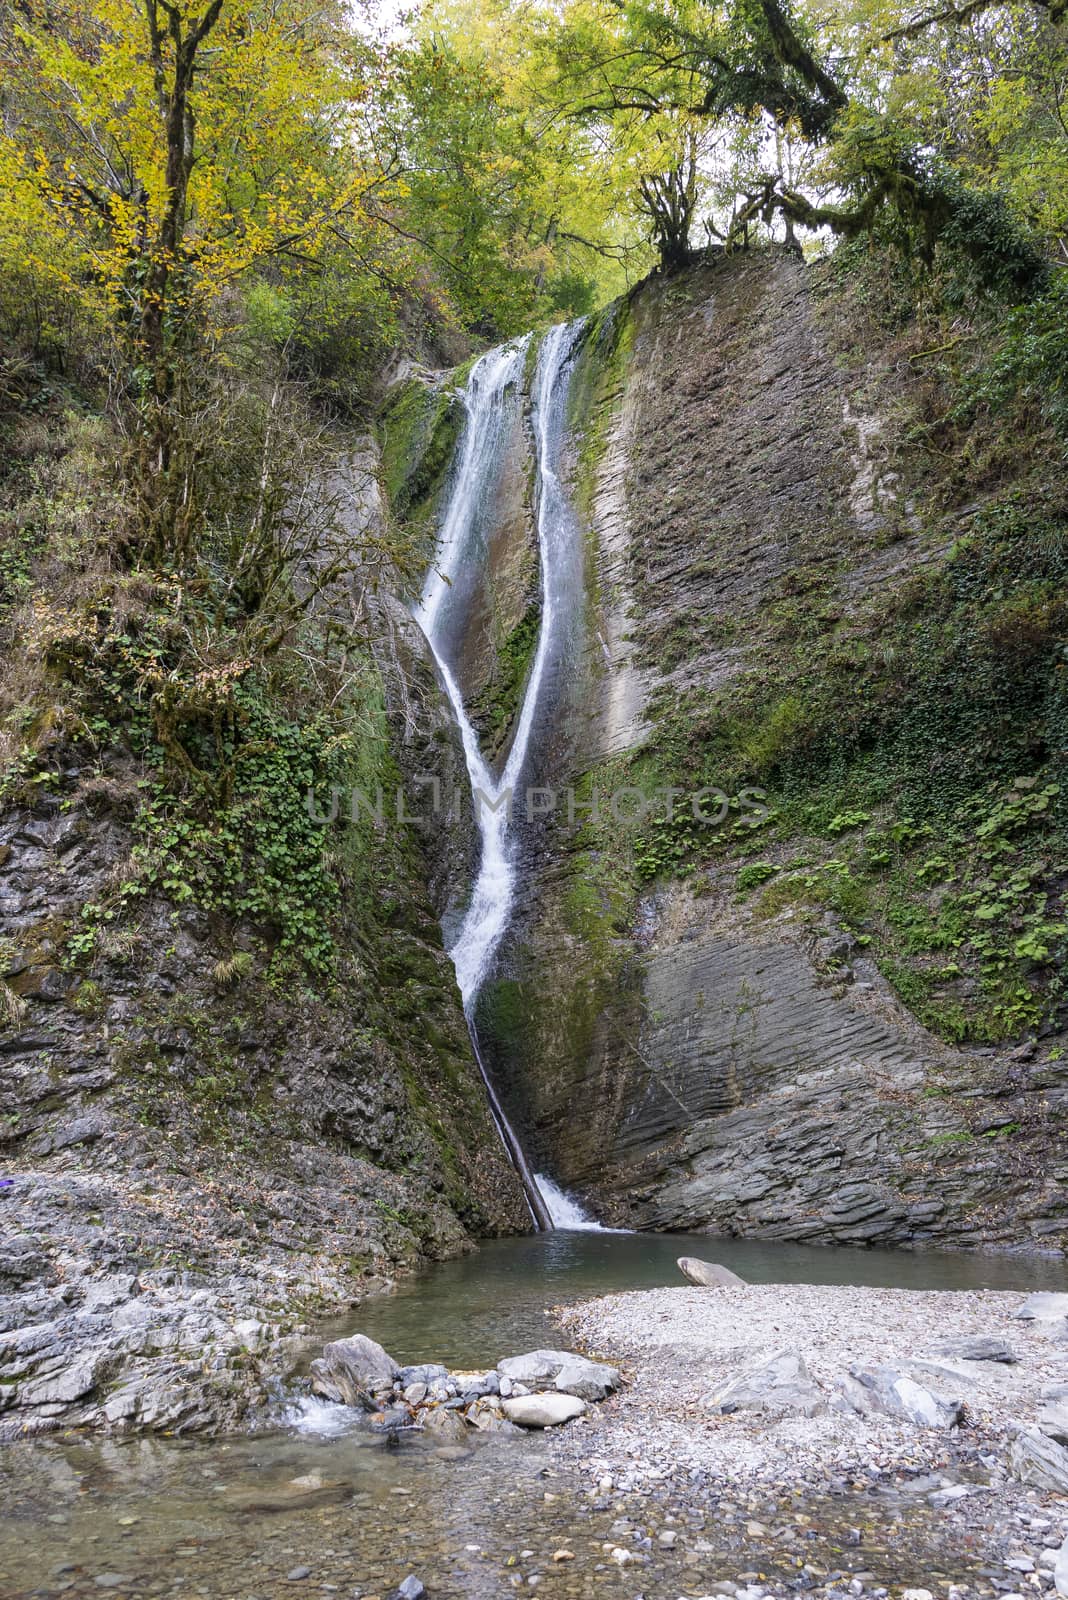 Orekhovsky waterfall is a tourist attraction near the city of Sochi, Russia. Clear day 29 October 2019.